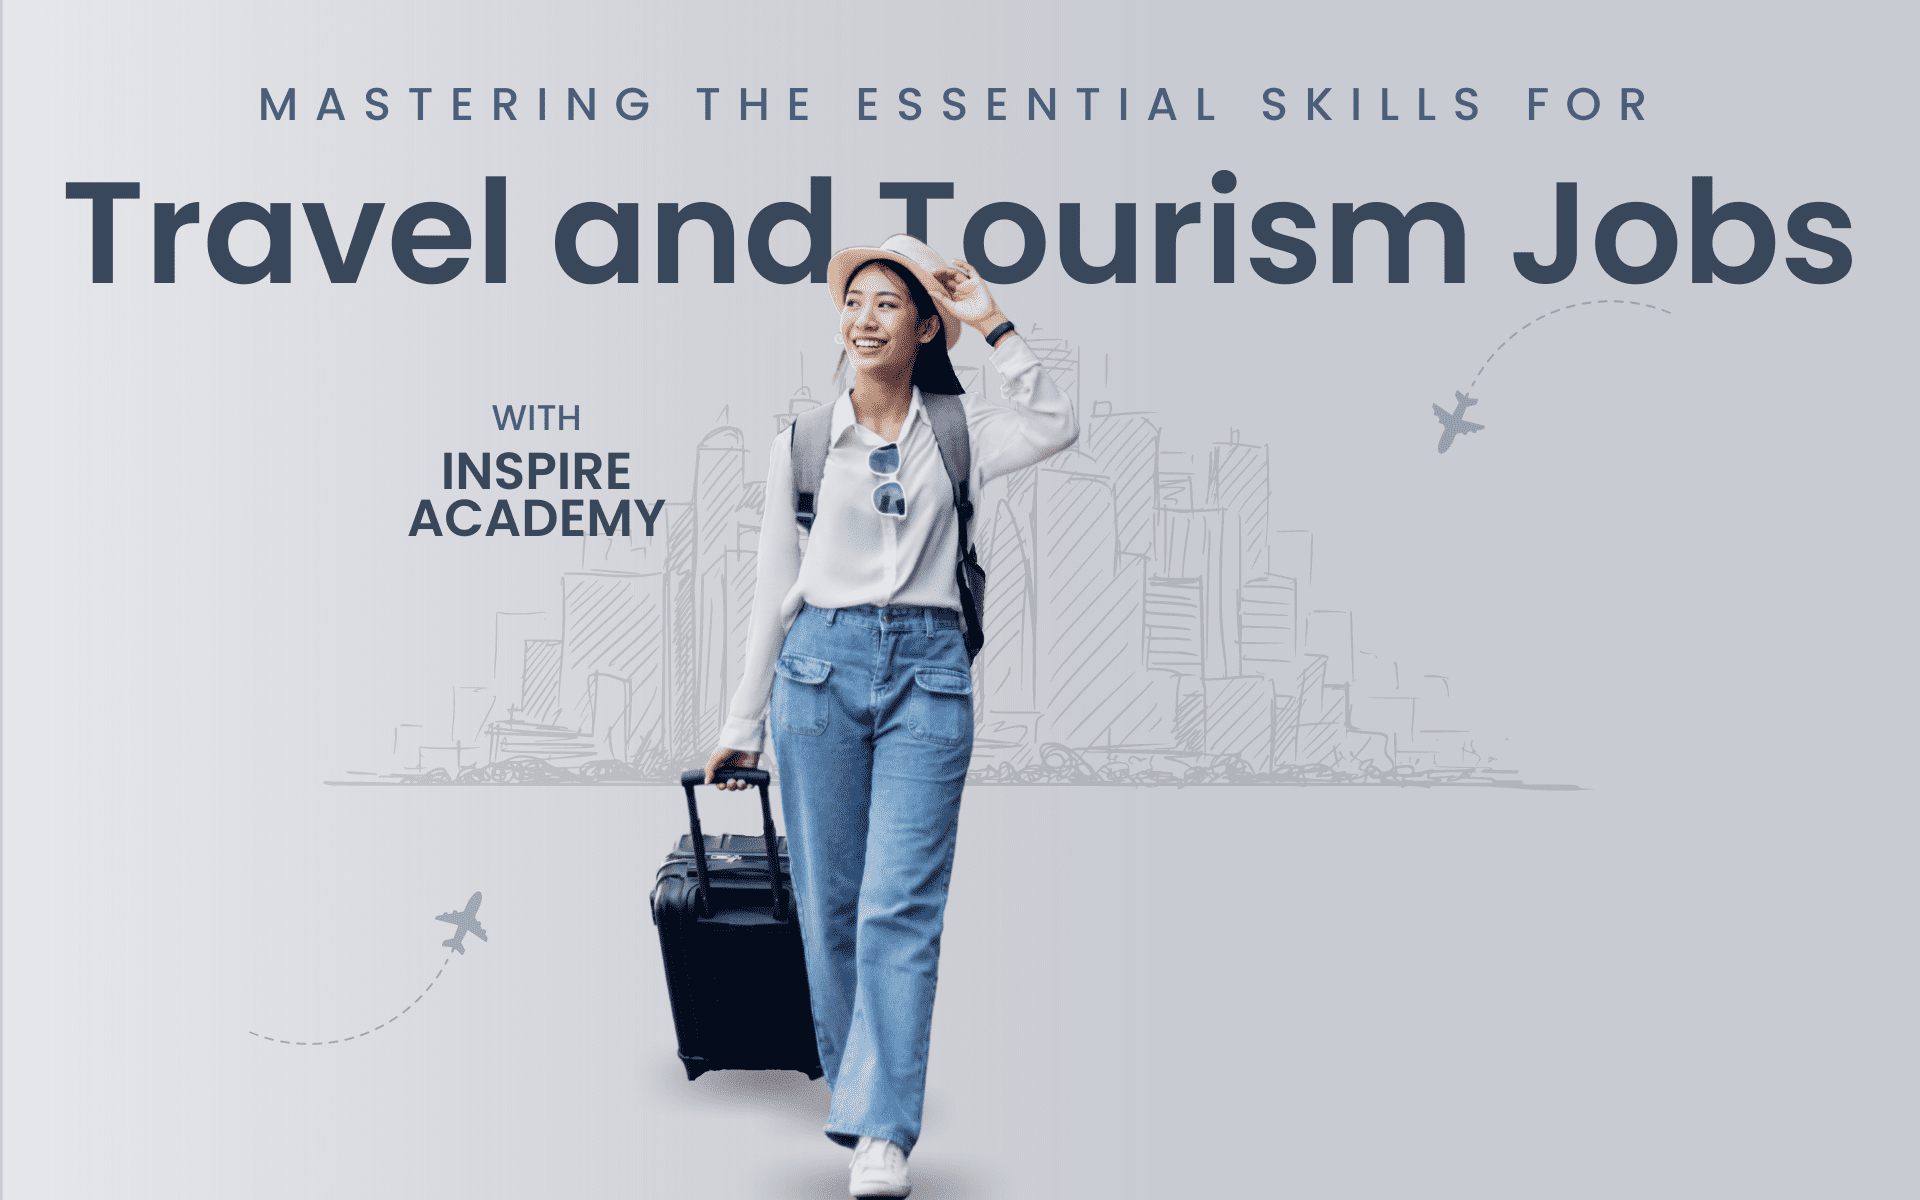 Travel and Toaurism Jobs